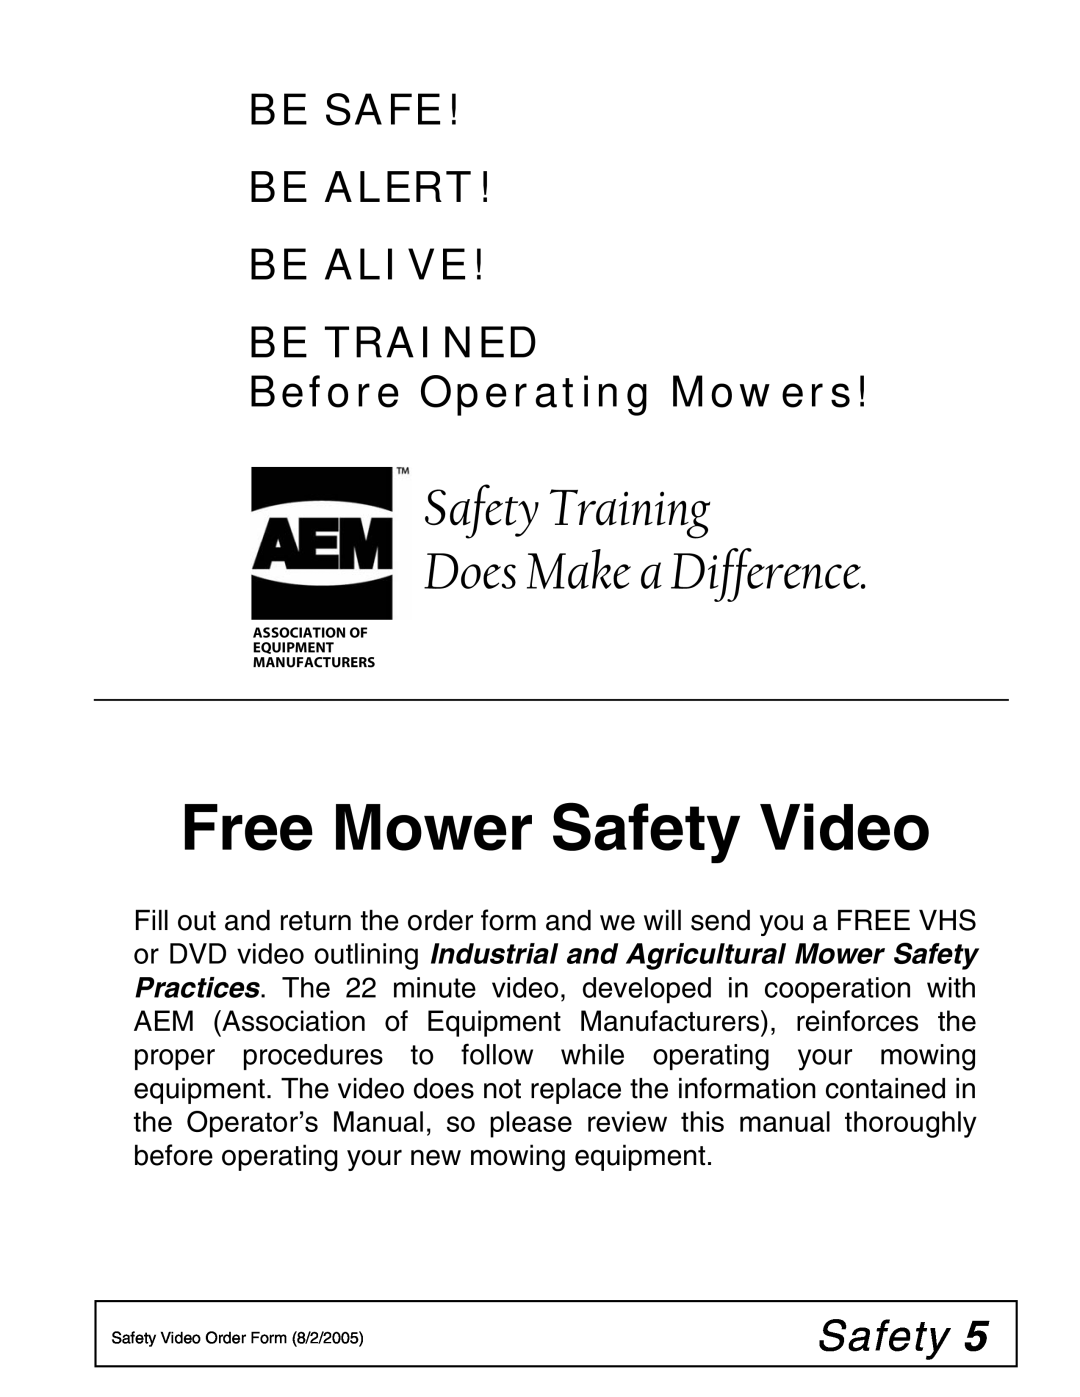 Woods Equipment BW180HDQ Free Mower Safety Video, Safety Training Does Make a Difference, Before Operating Mowers 